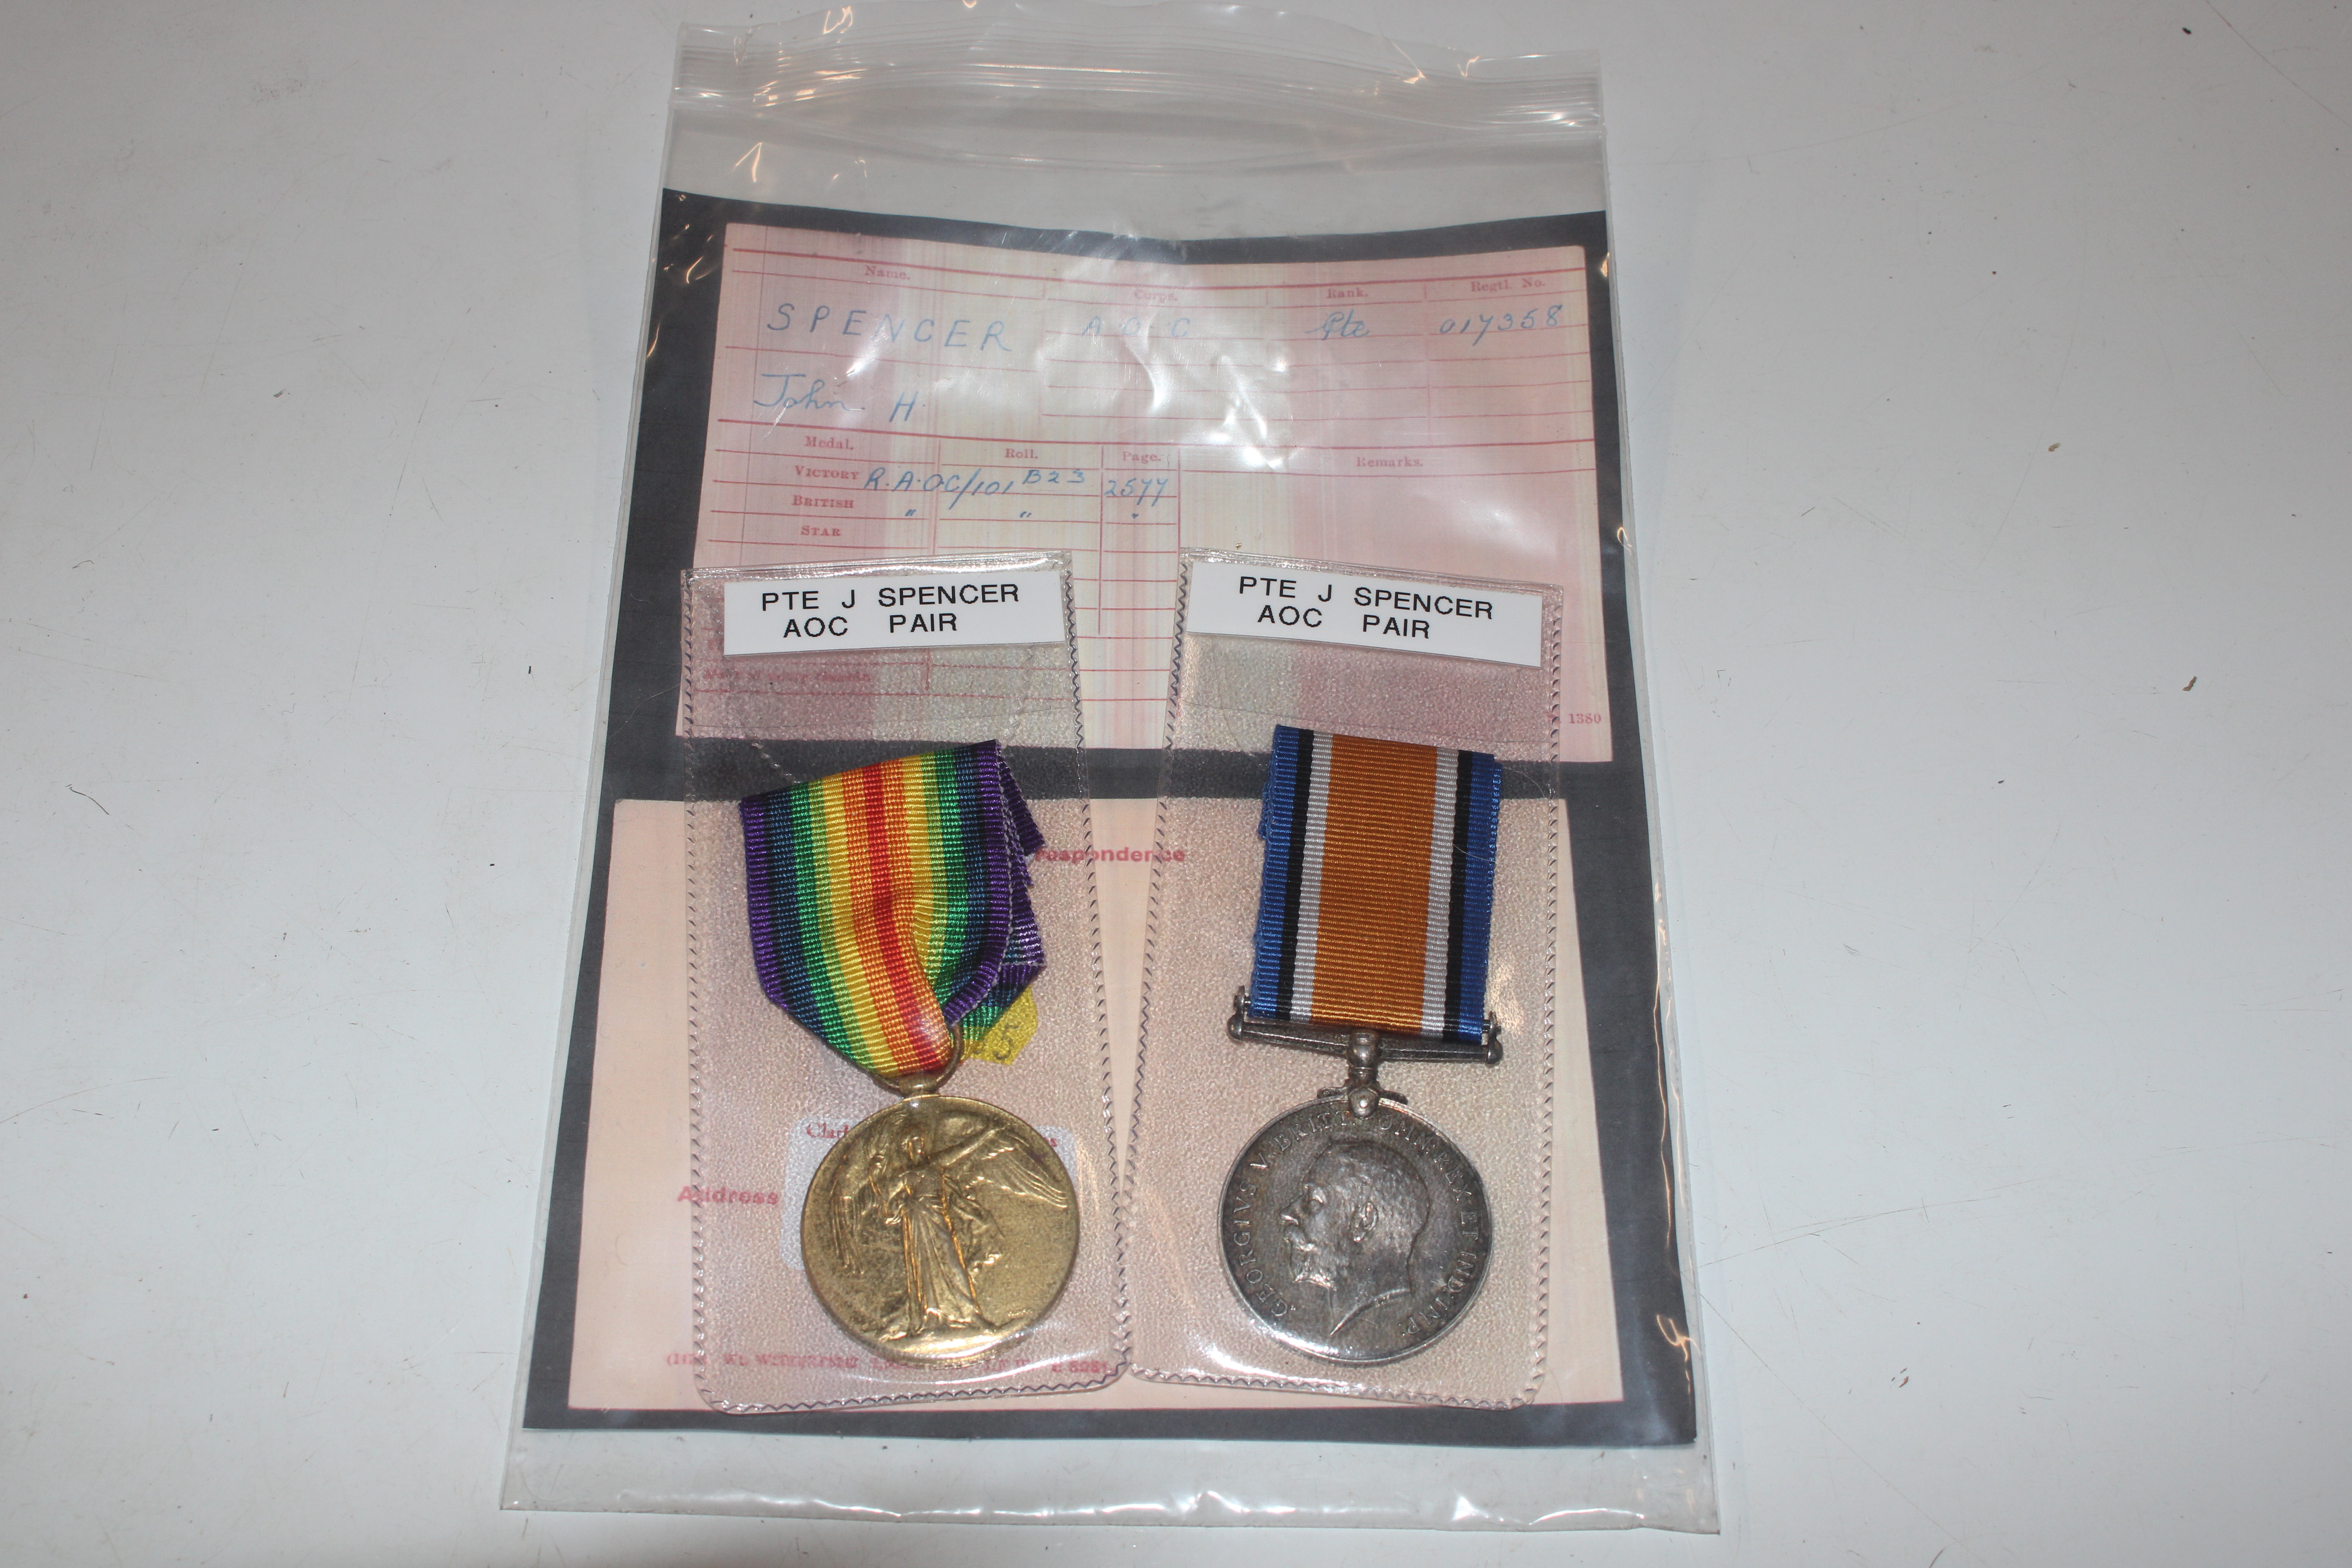 BWM and Victory medals to 7358 Pvt. J.H. Spencer A